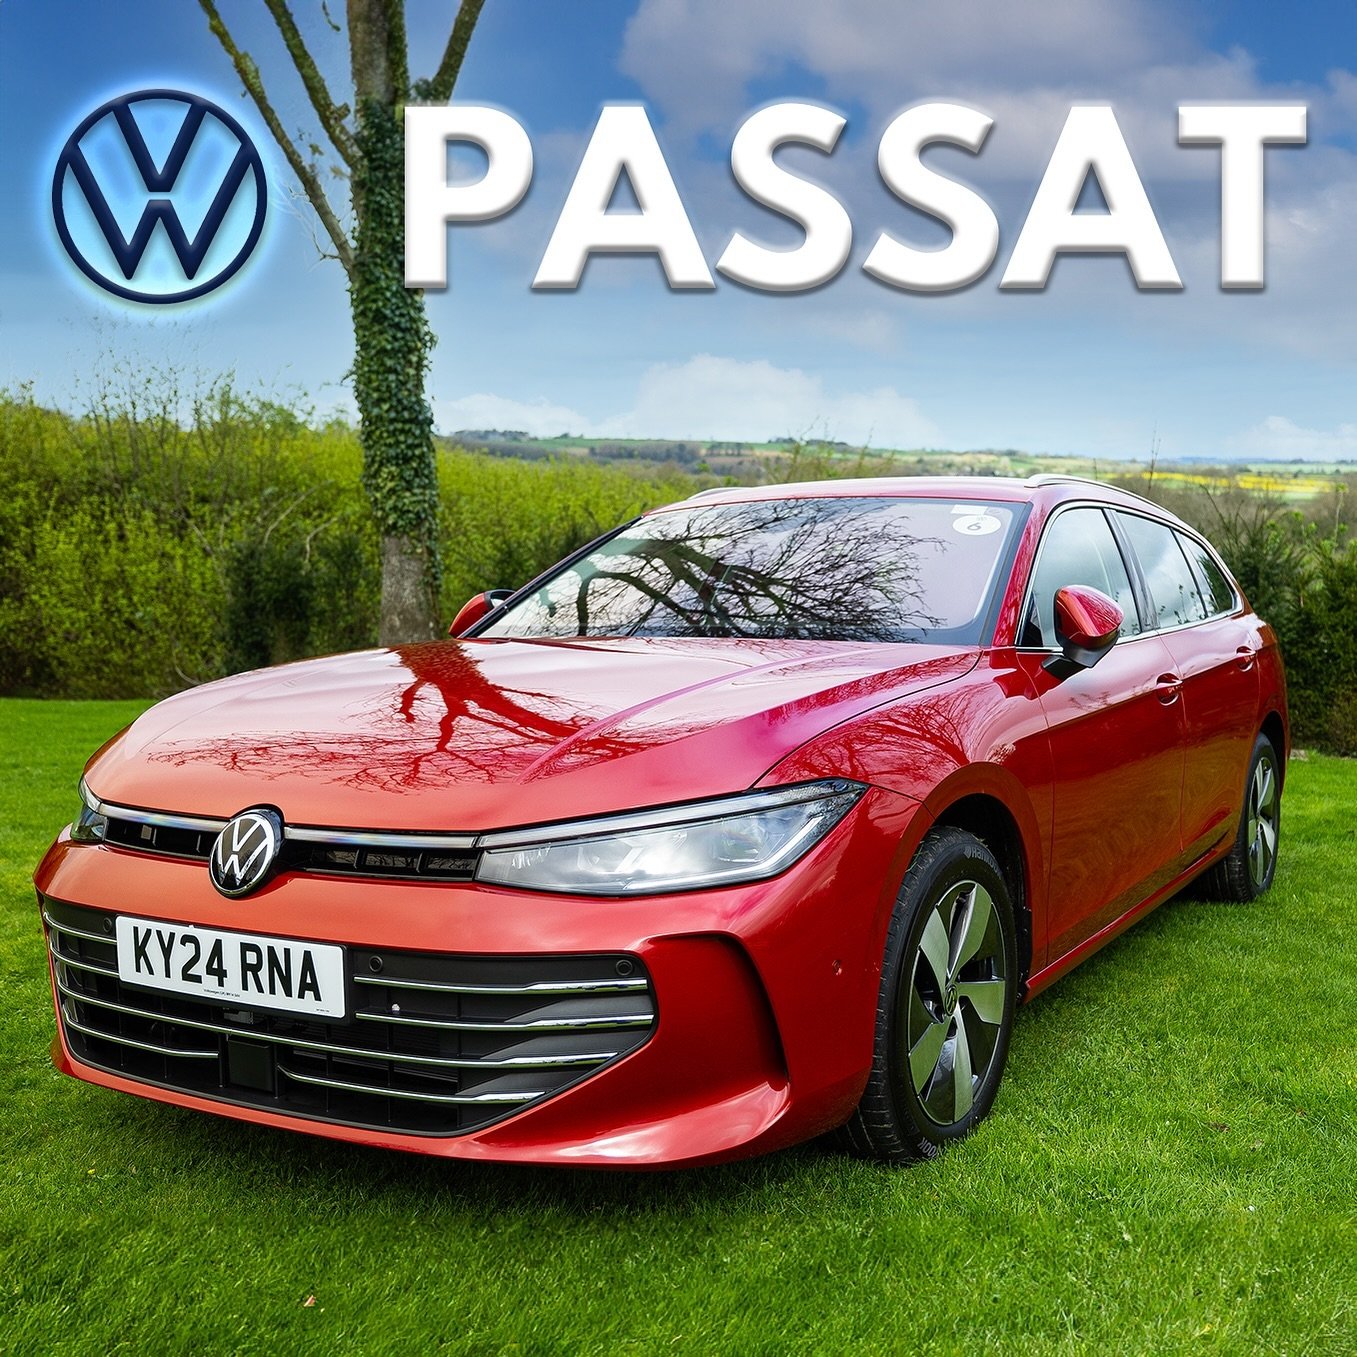 The new Passat by Volkswagen is out on UK roads and I got the chance to check out this rather spacious model!

It&rsquo;s grown in size a little but all of that extra space has gone to the rear and of course the boot, new lights front and rear with a